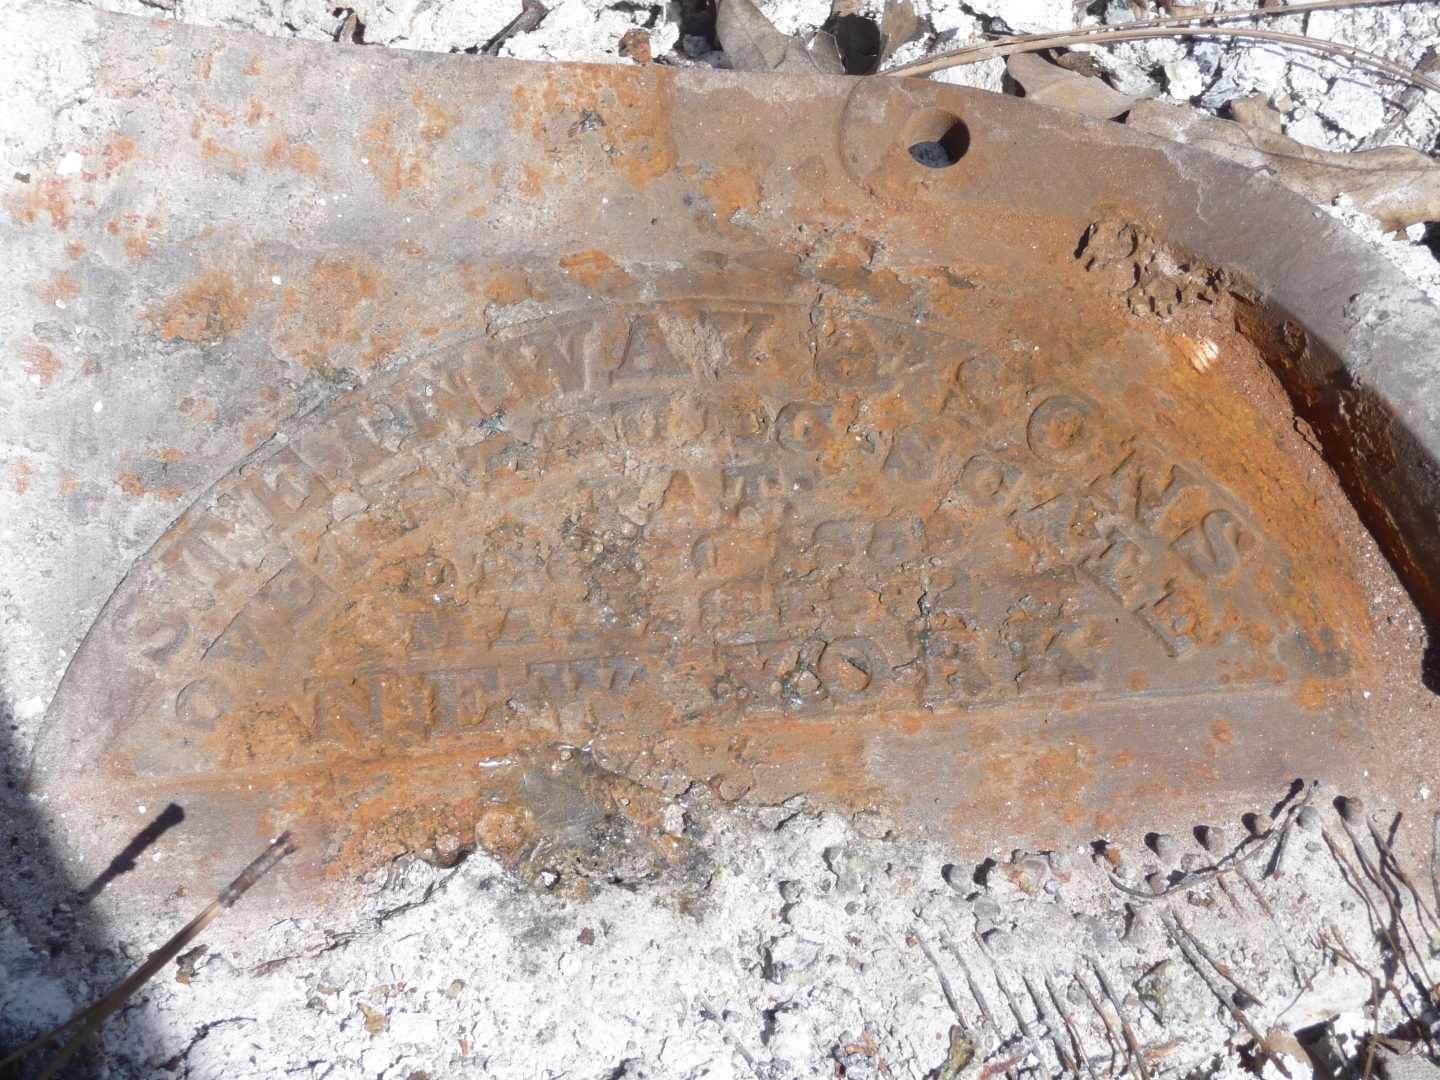 The rusted fire-scorched patent of the piano.